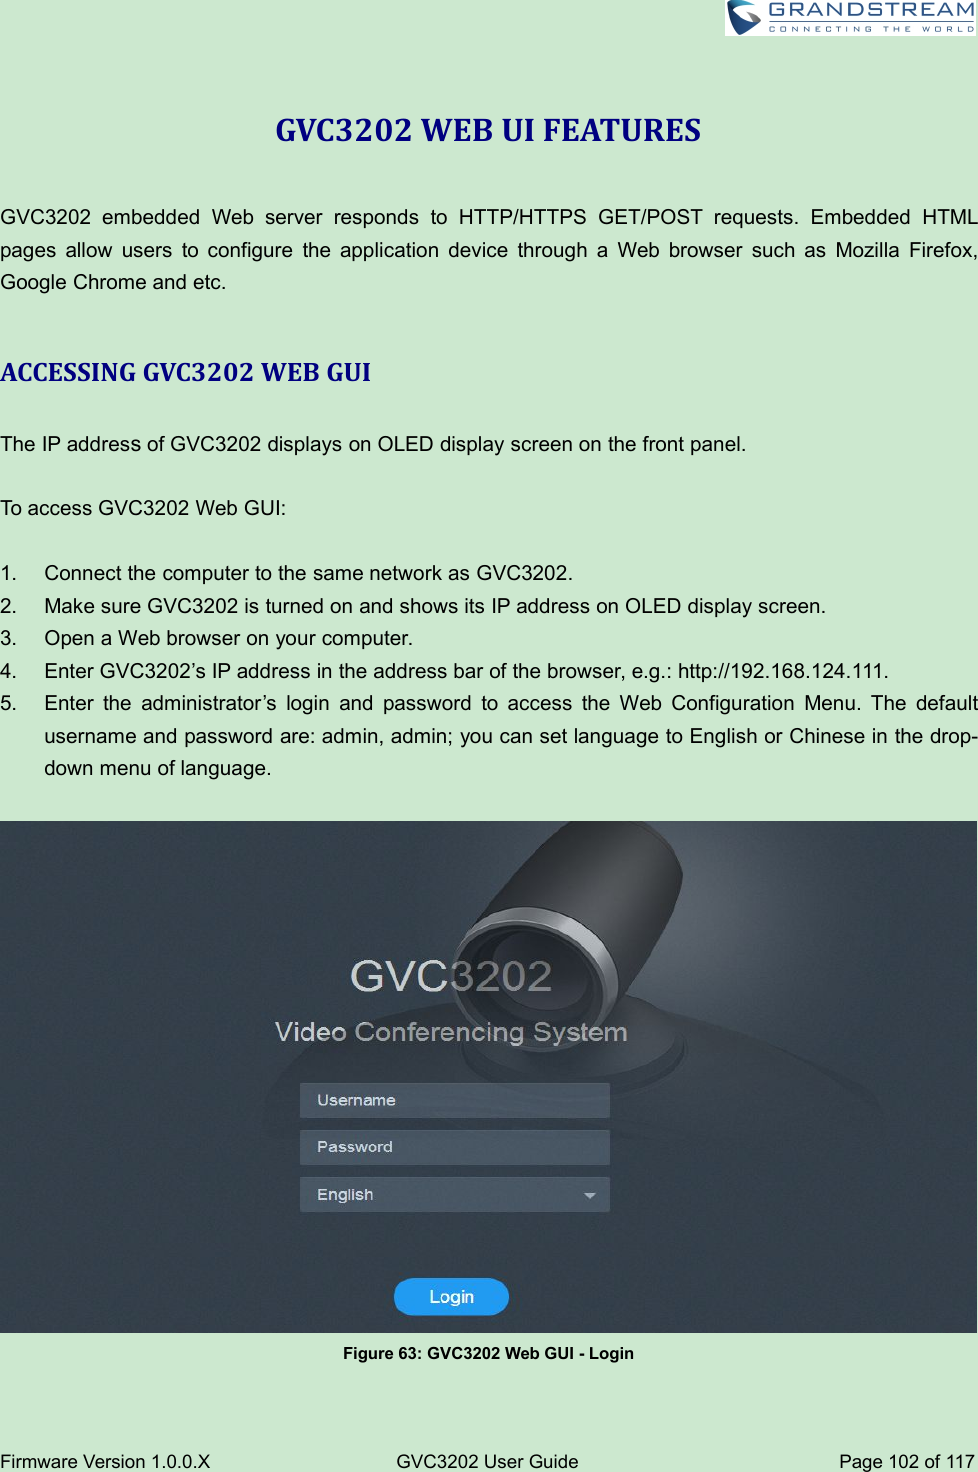 Firmware Version 1.0.0.XGVC3202 User GuidePage 102 of 117GVC3202 WEB UI FEATURESGVC3202 embedded Web server responds to HTTP/HTTPS GET/POST requests. Embedded HTMLpages allow users to configure the application device through a Web browser such as Mozilla Firefox,Google Chrome and etc.ACCESSING GVC3202 WEB GUIThe IP addressof GVC3202 displays on OLED display screen on the front panel.To access GVC3202 Web GUI:1. Connect the computer to the same network as GVC3202.2. Make sure GVC3202 is turned on and shows its IP address on OLED display screen.3. Open a Web browser on your computer.4. Enter GVC3202’s IP address in the address bar of the browser, e.g.: http://192.168.124.111.5. Enter the administrator’s login and password to access the Web Configuration Menu. The defaultusername and password are: admin, admin; you can set language to English or Chinese in the drop-down menu of language.Figure 63: GVC3202 Web GUI - Login